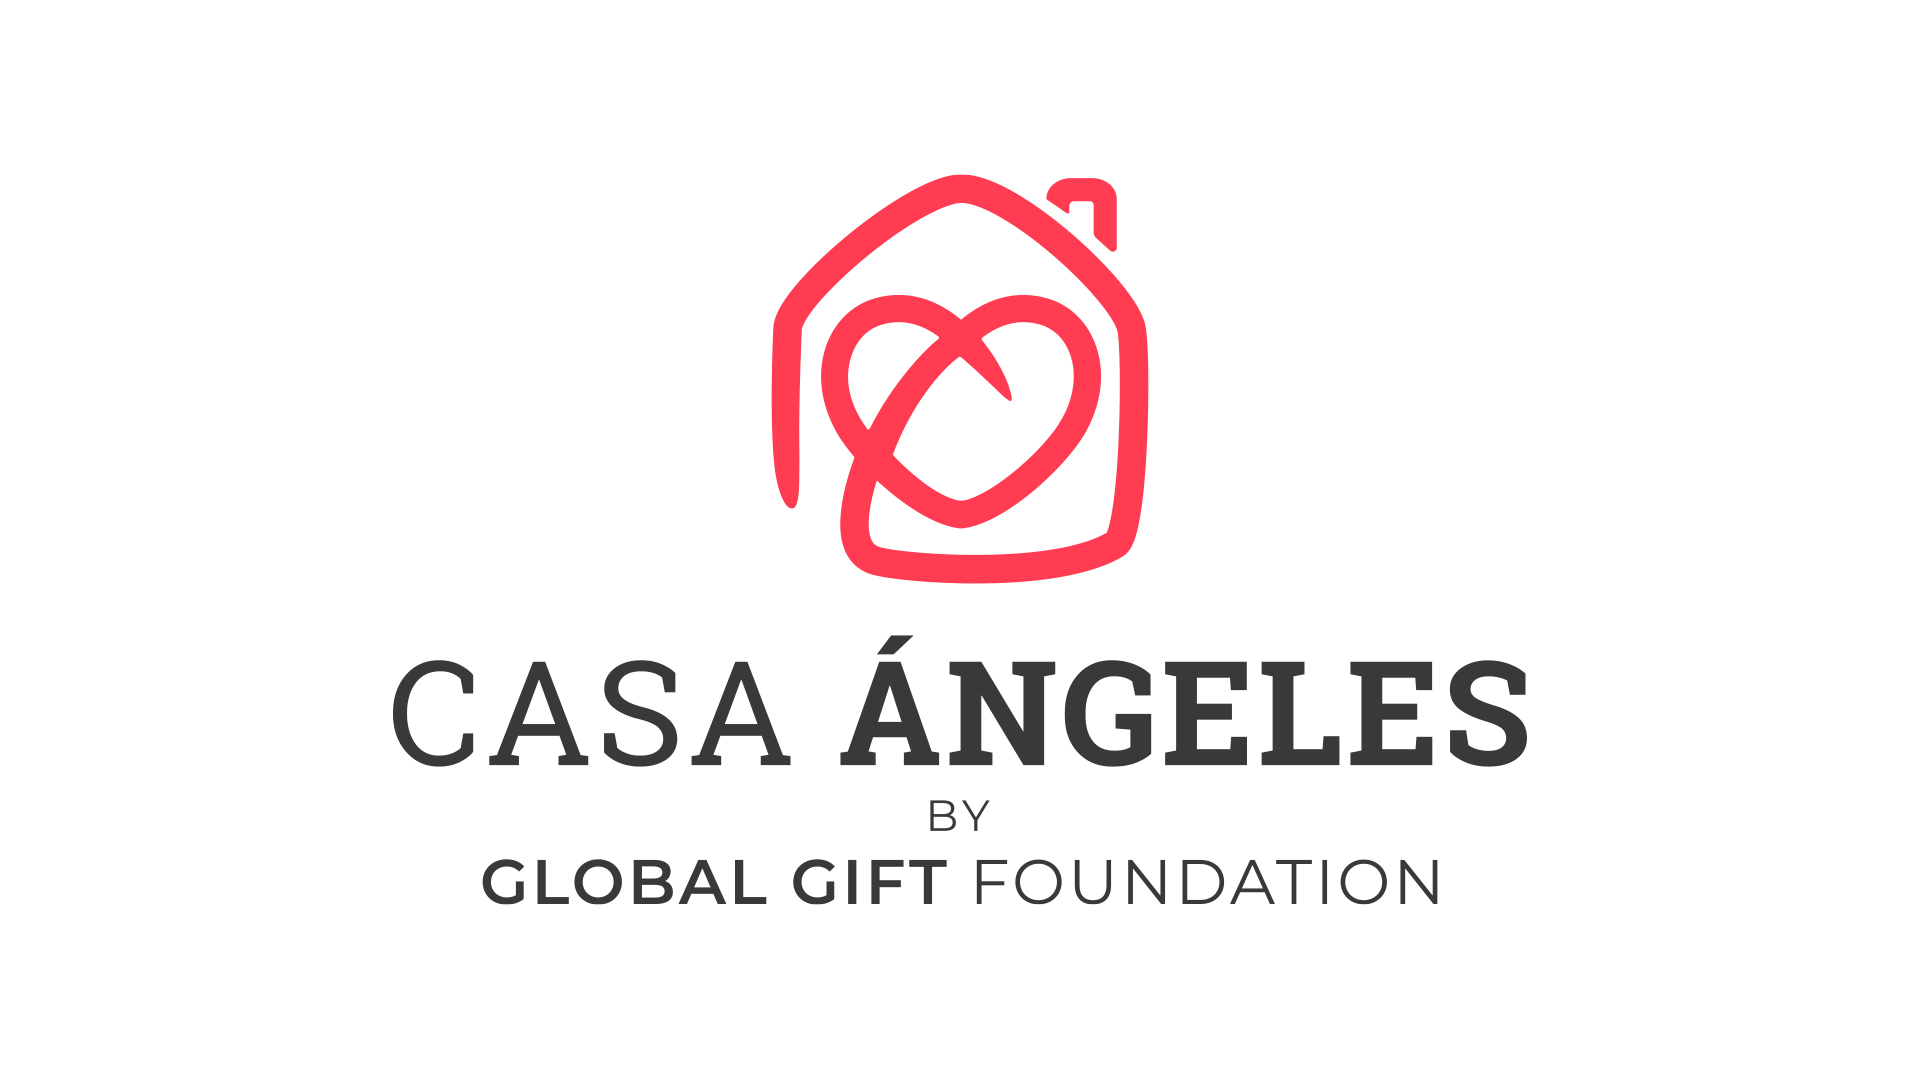 Casa Angeles by Global Gift Foundation